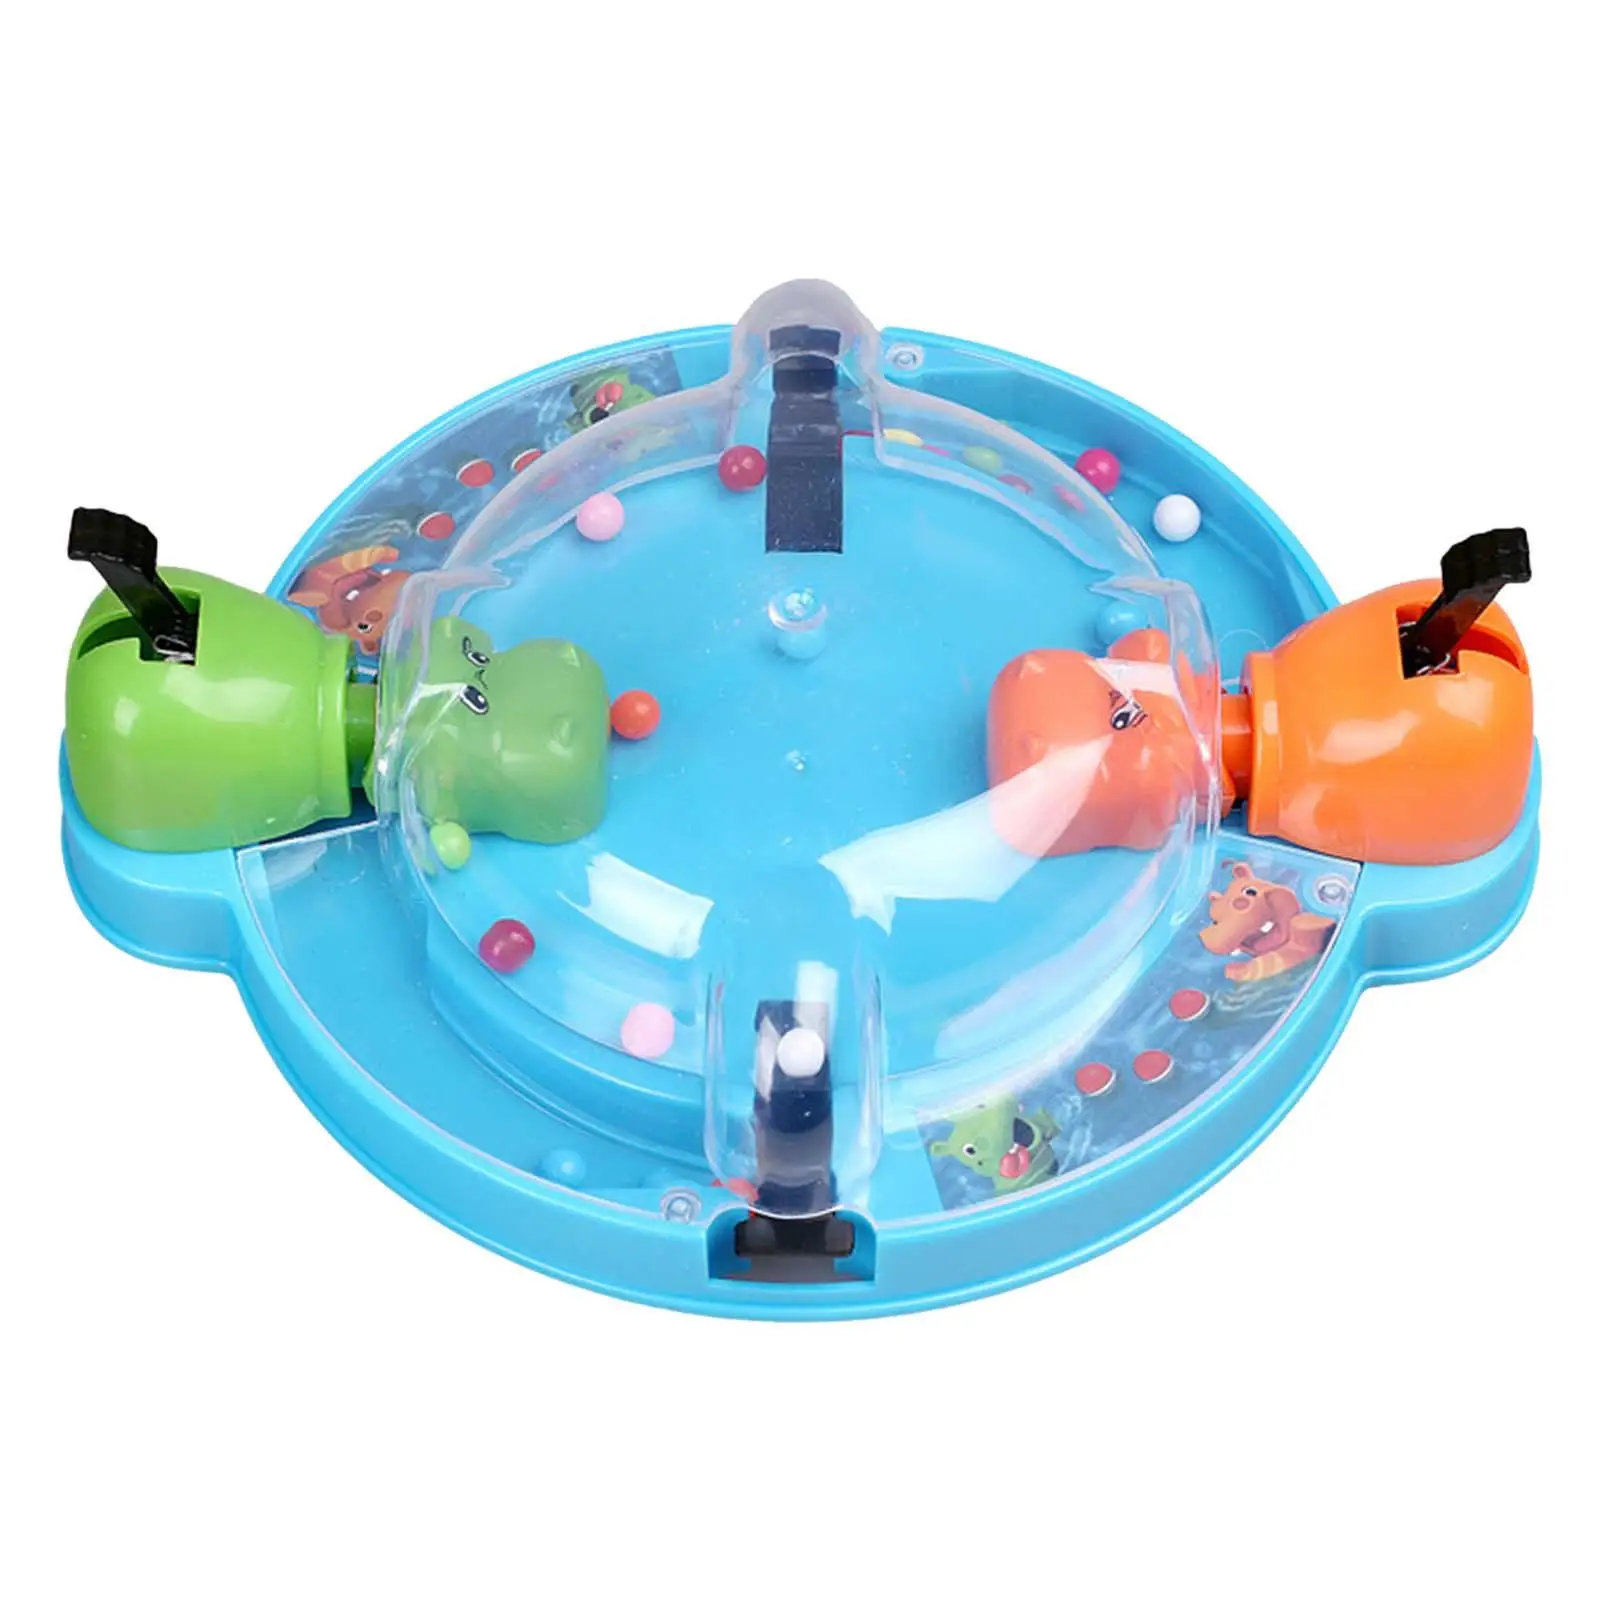 speeds race Toy Fine Motor Skills strategy Hungry Hippo Bead Contest for Birthday gifts Home Preschool